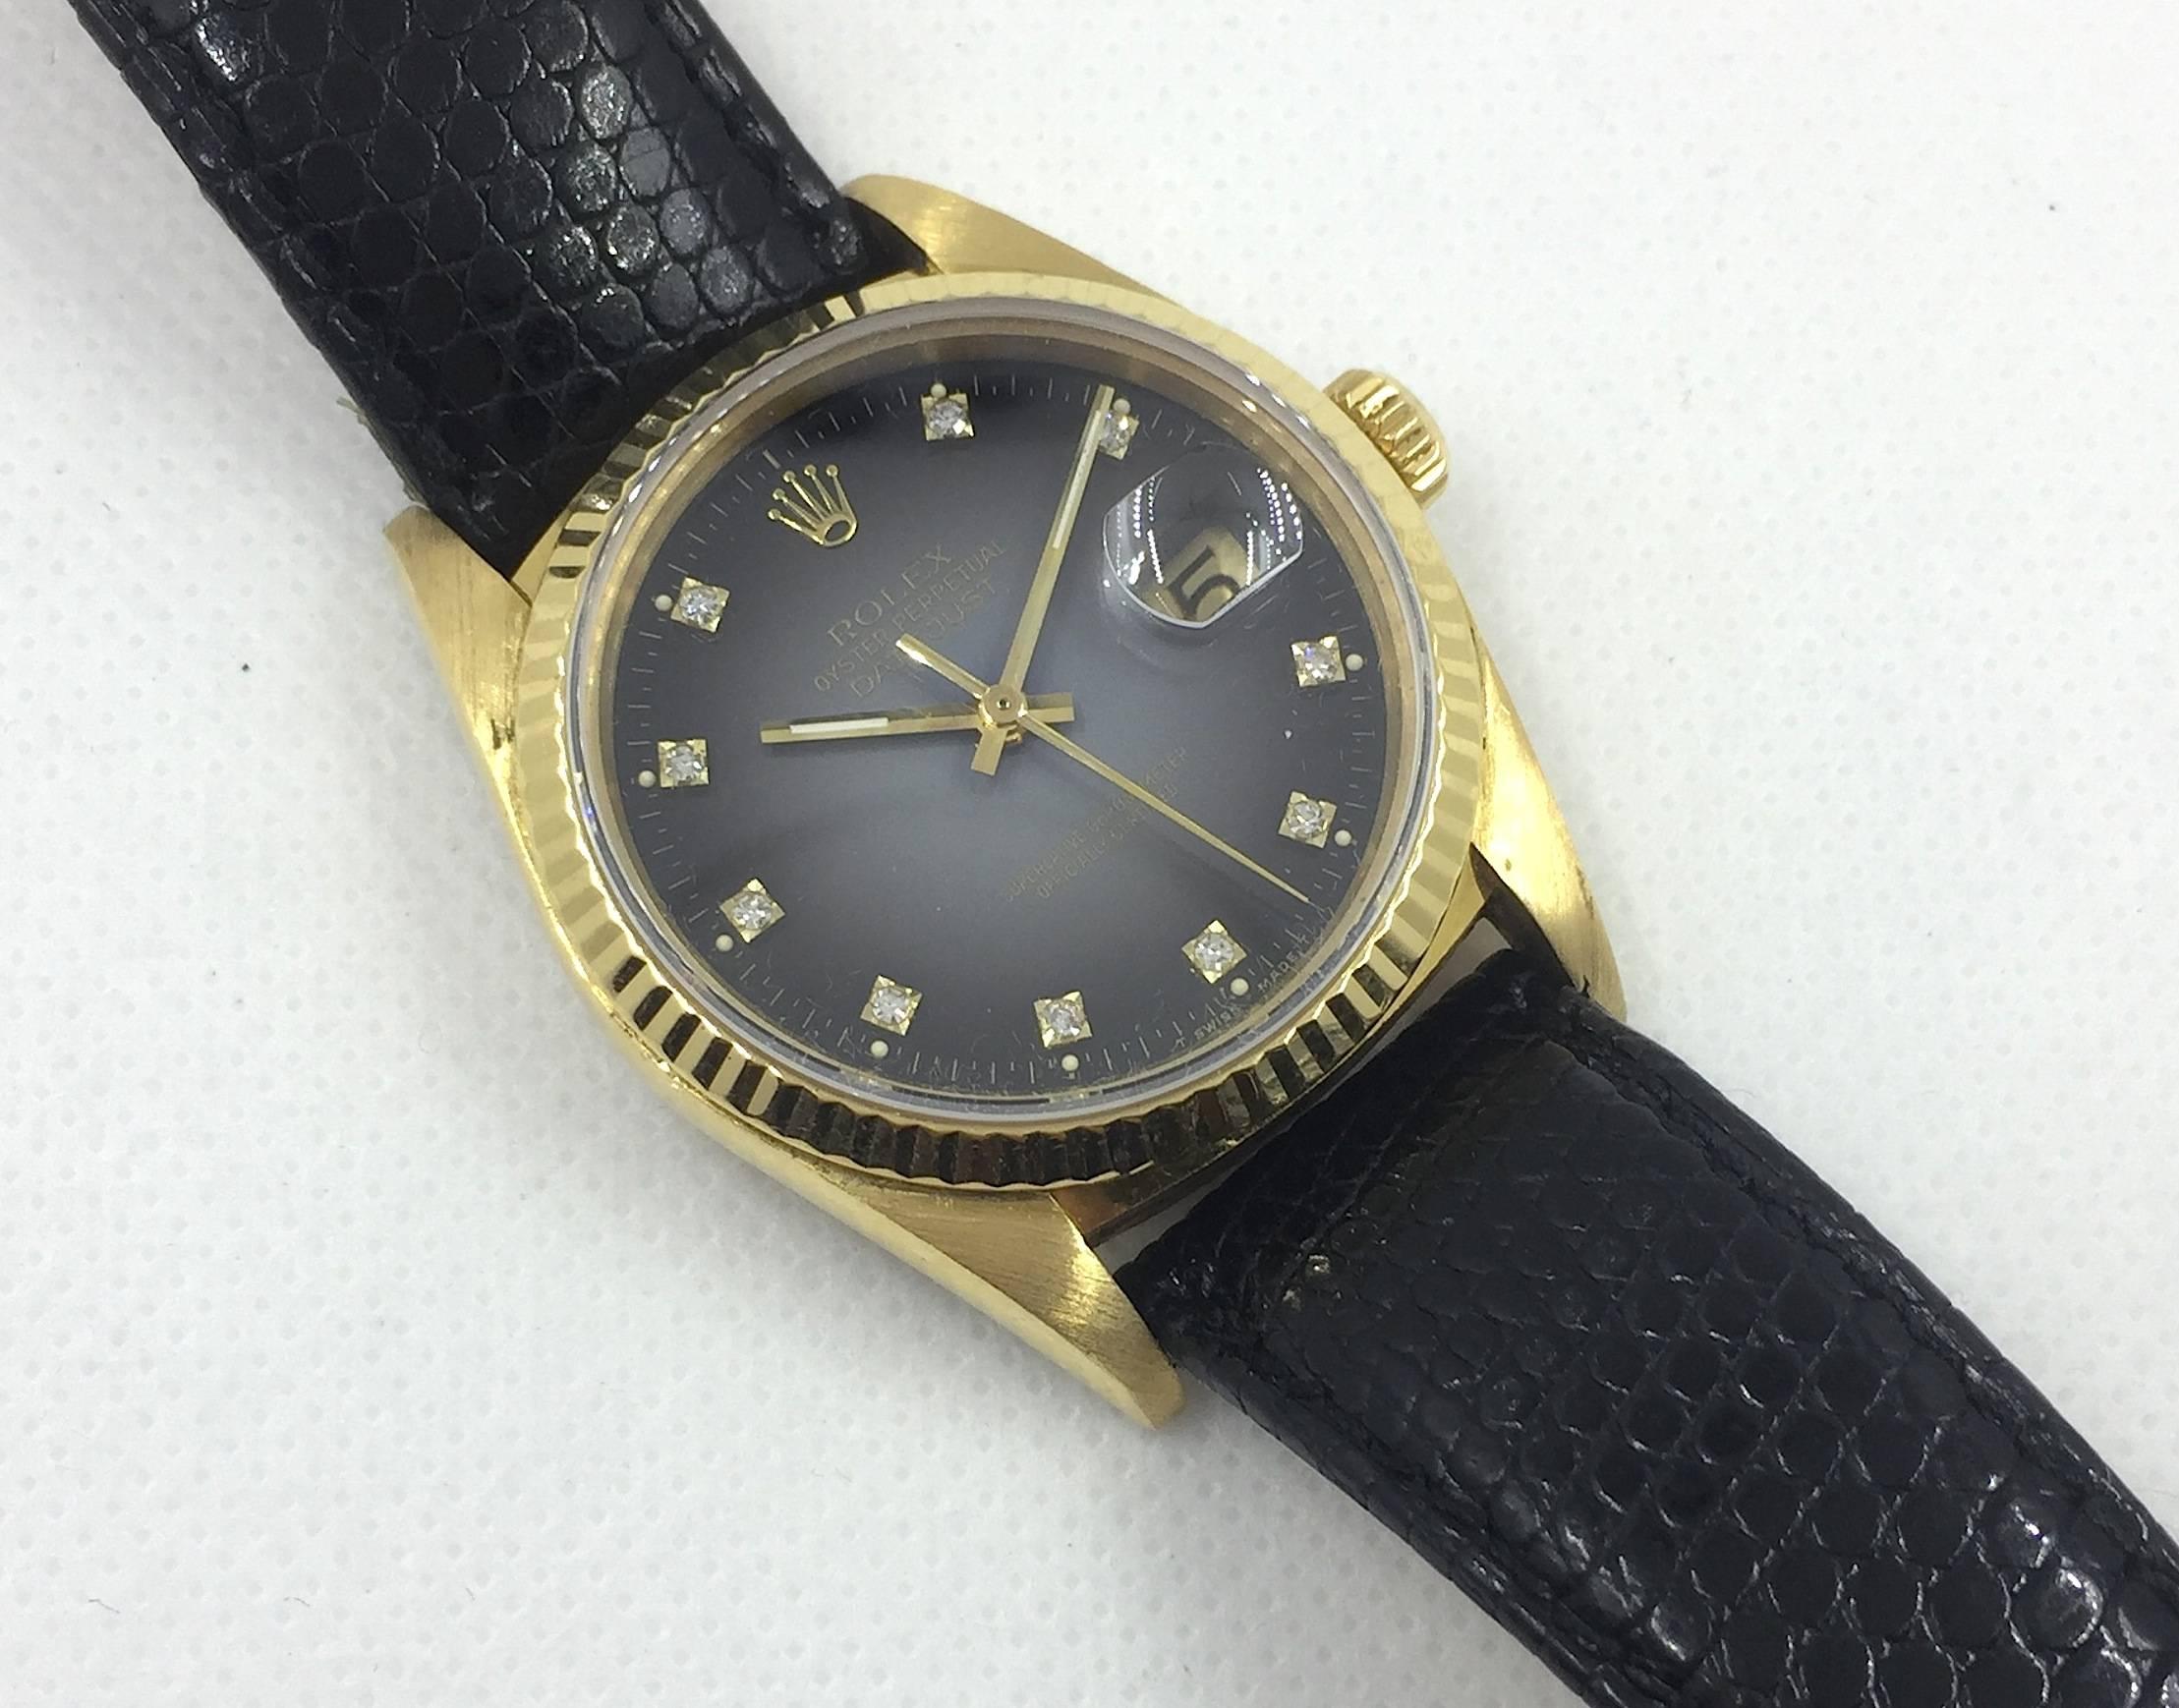 Rolex 18K Yellow Gold Oyster Perpetual Datejust Wristwatch
Rare Factory Grey Vignette Degrade Diamond Dial
18K Yellow Gold Fluted Bezel
36mm in size 
Rolex Calibre Base 3000 Automatic Movement
Sapphire Crystal
1980's Production
Comes Fitted on